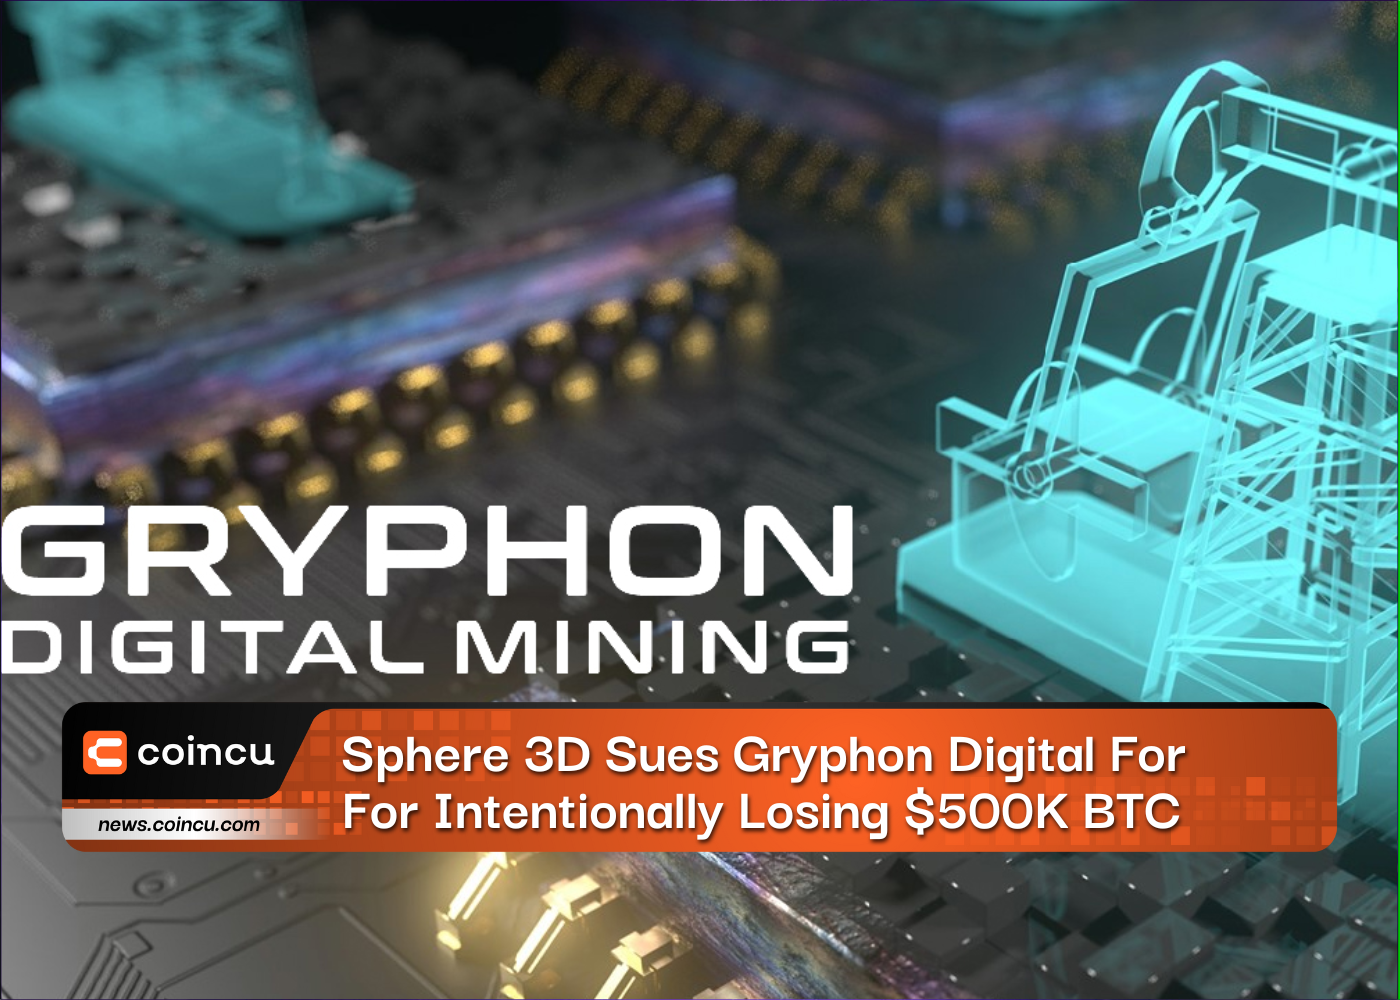 Sphere 3D Sues Gryphon Digital For Intentionally Losing $500K BTC